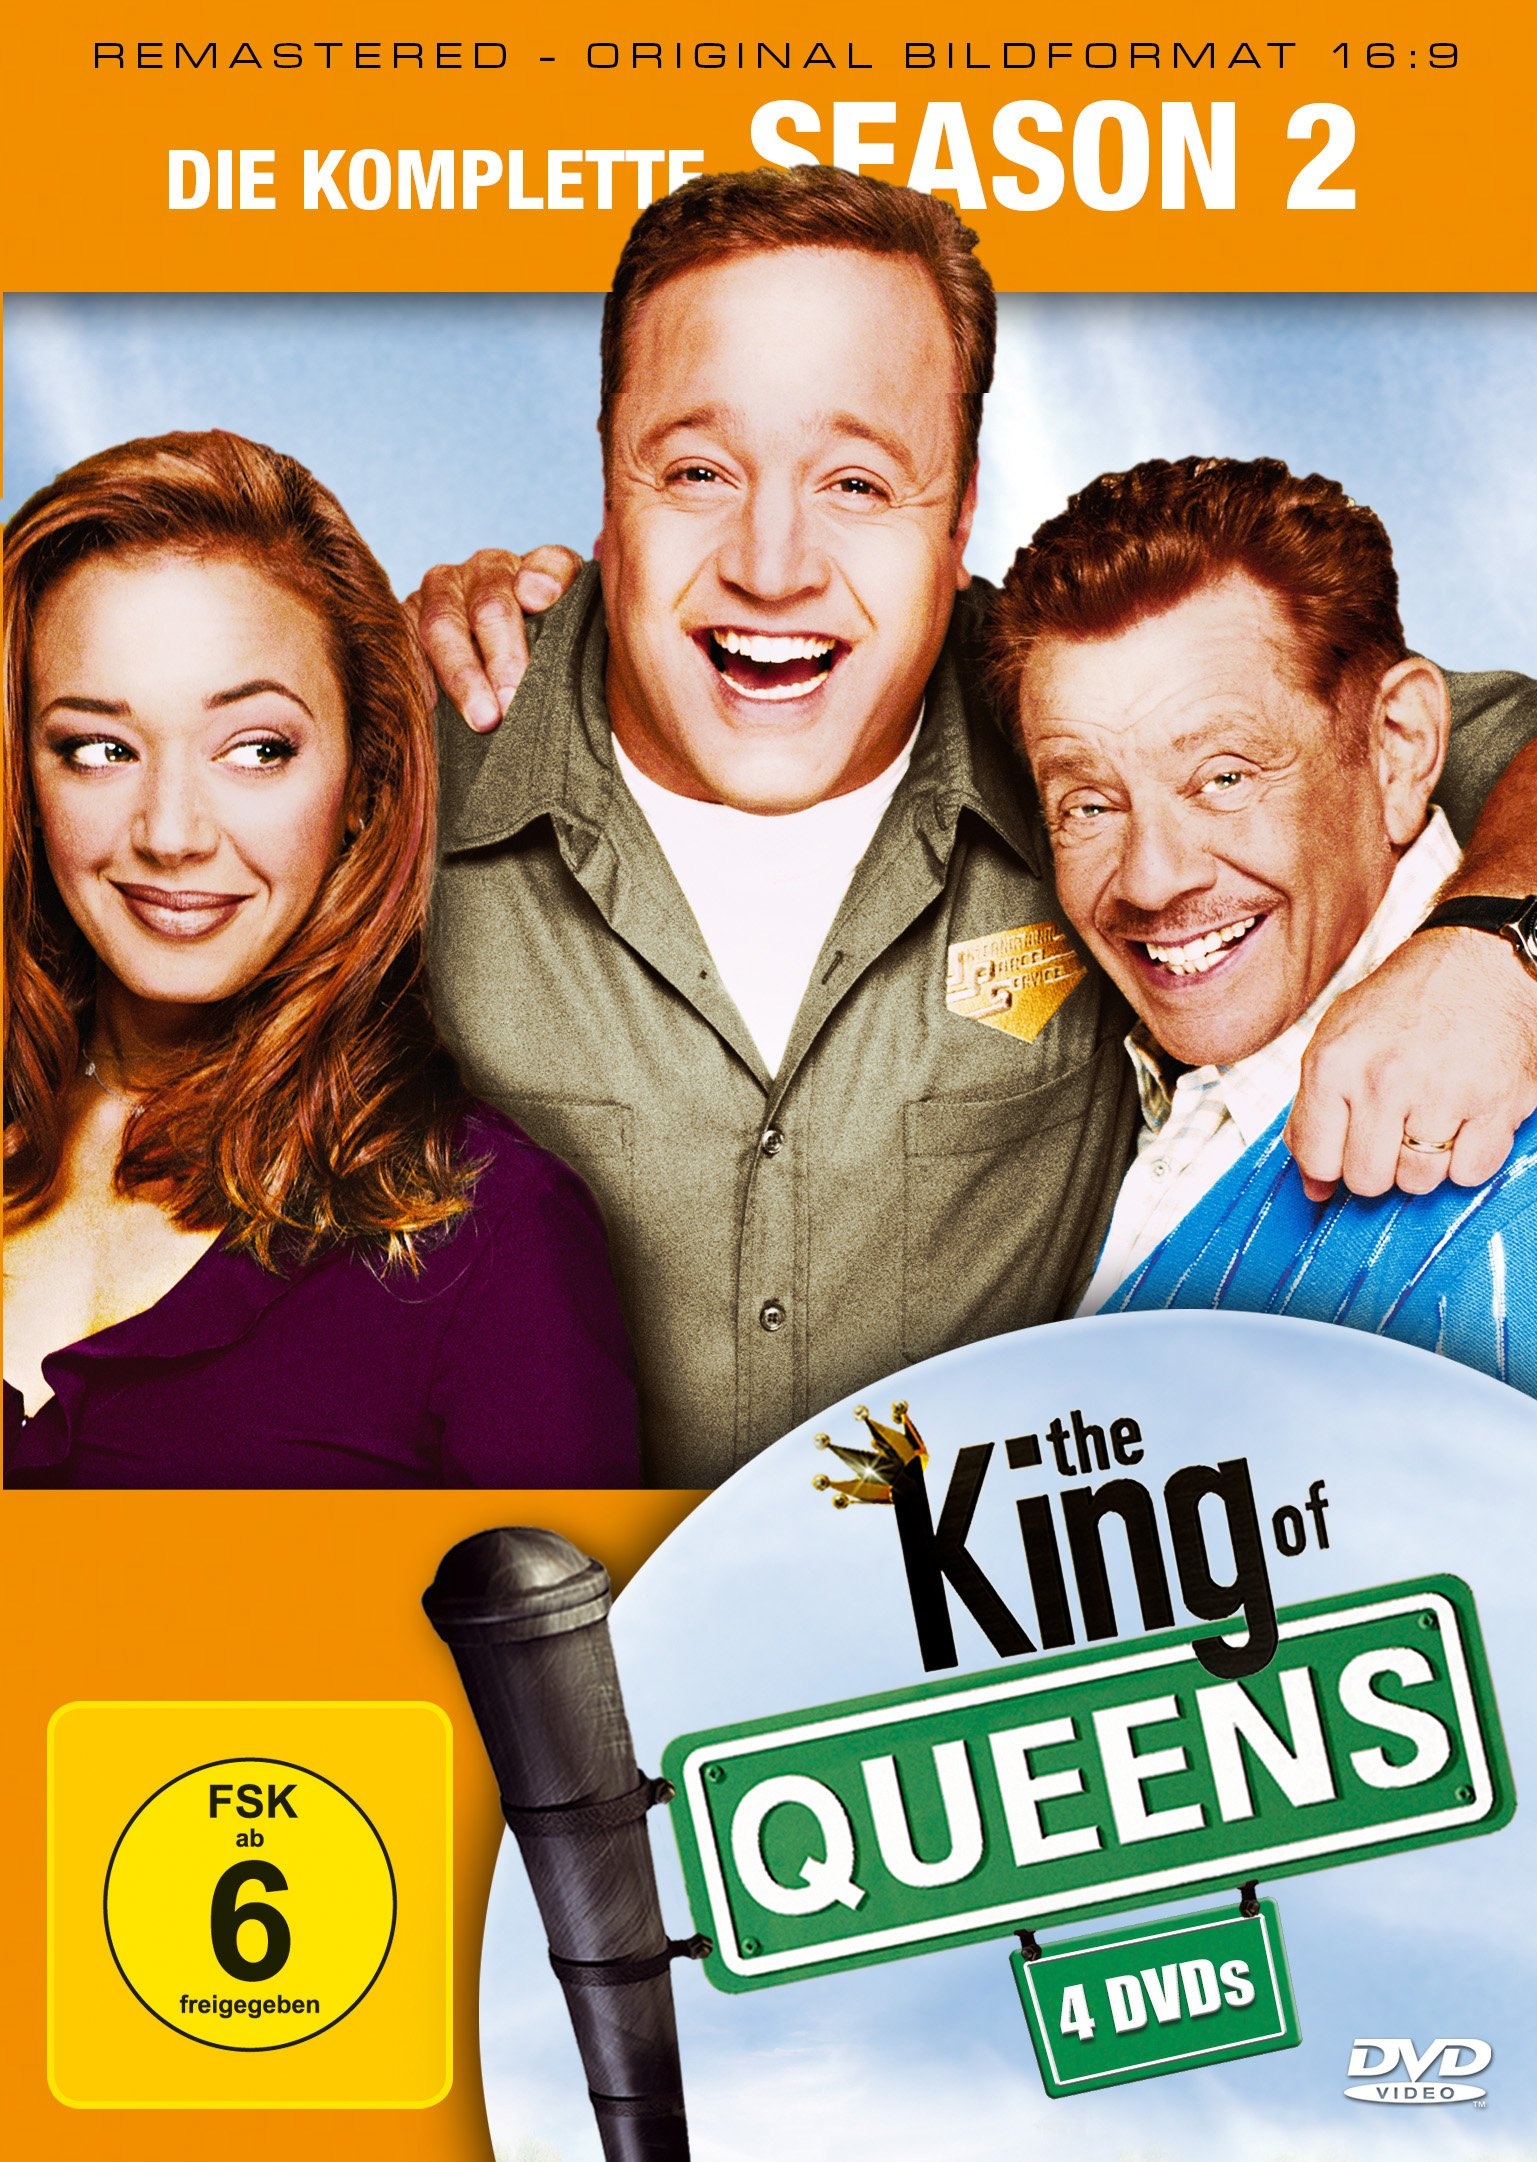 The King of Queens - Season 2 - Remastered [4 DVDs]